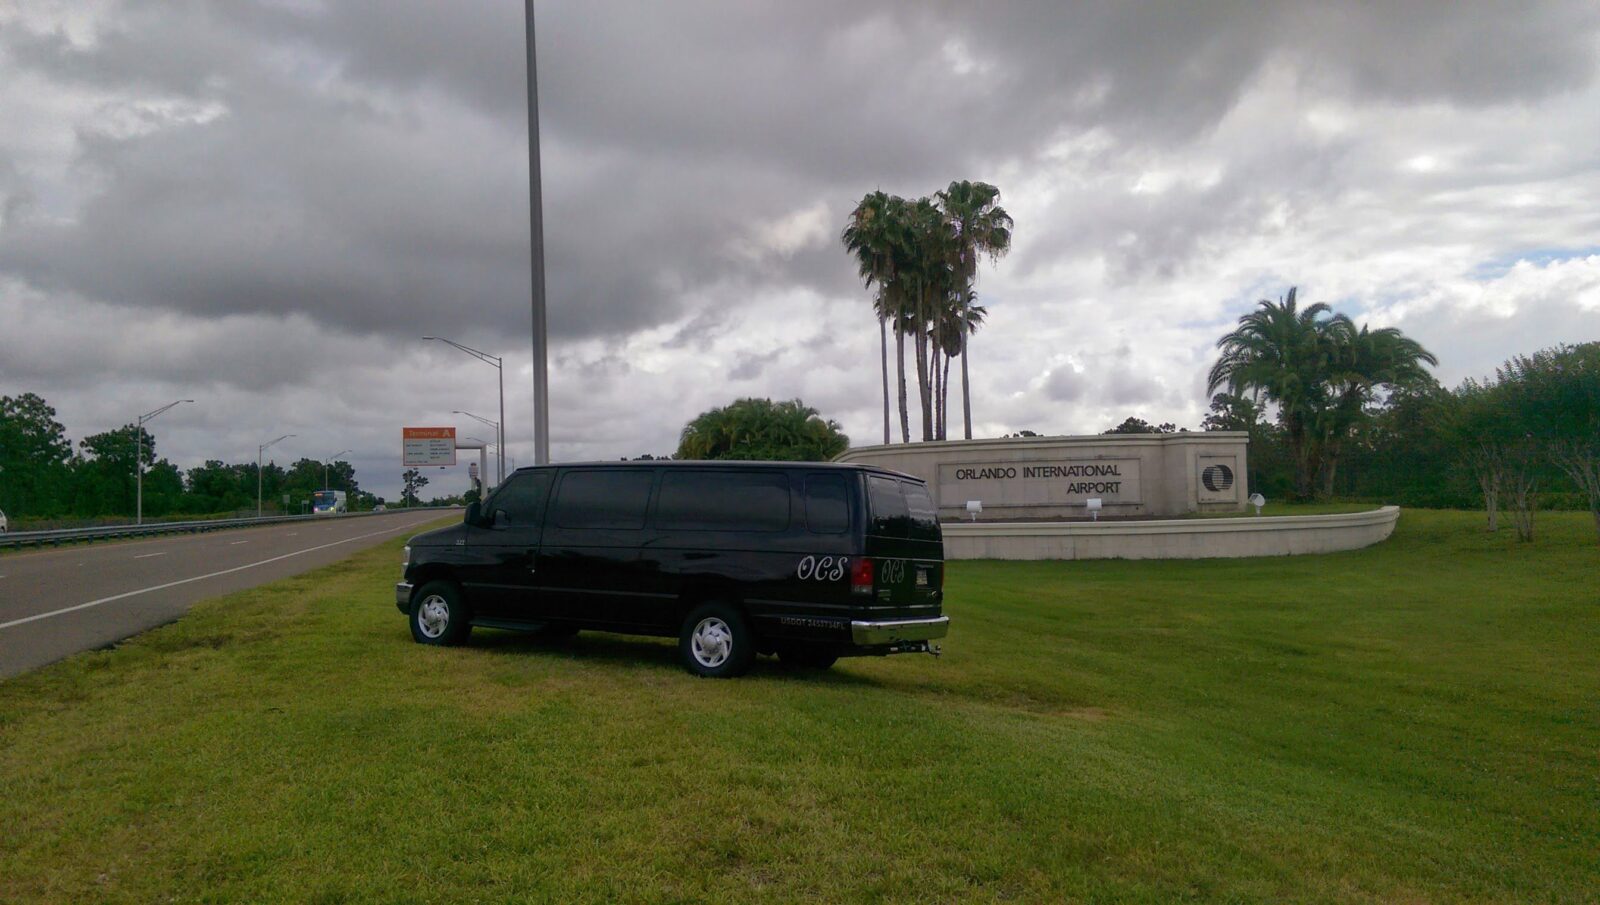 Transportation from Sanford Airport to Disney